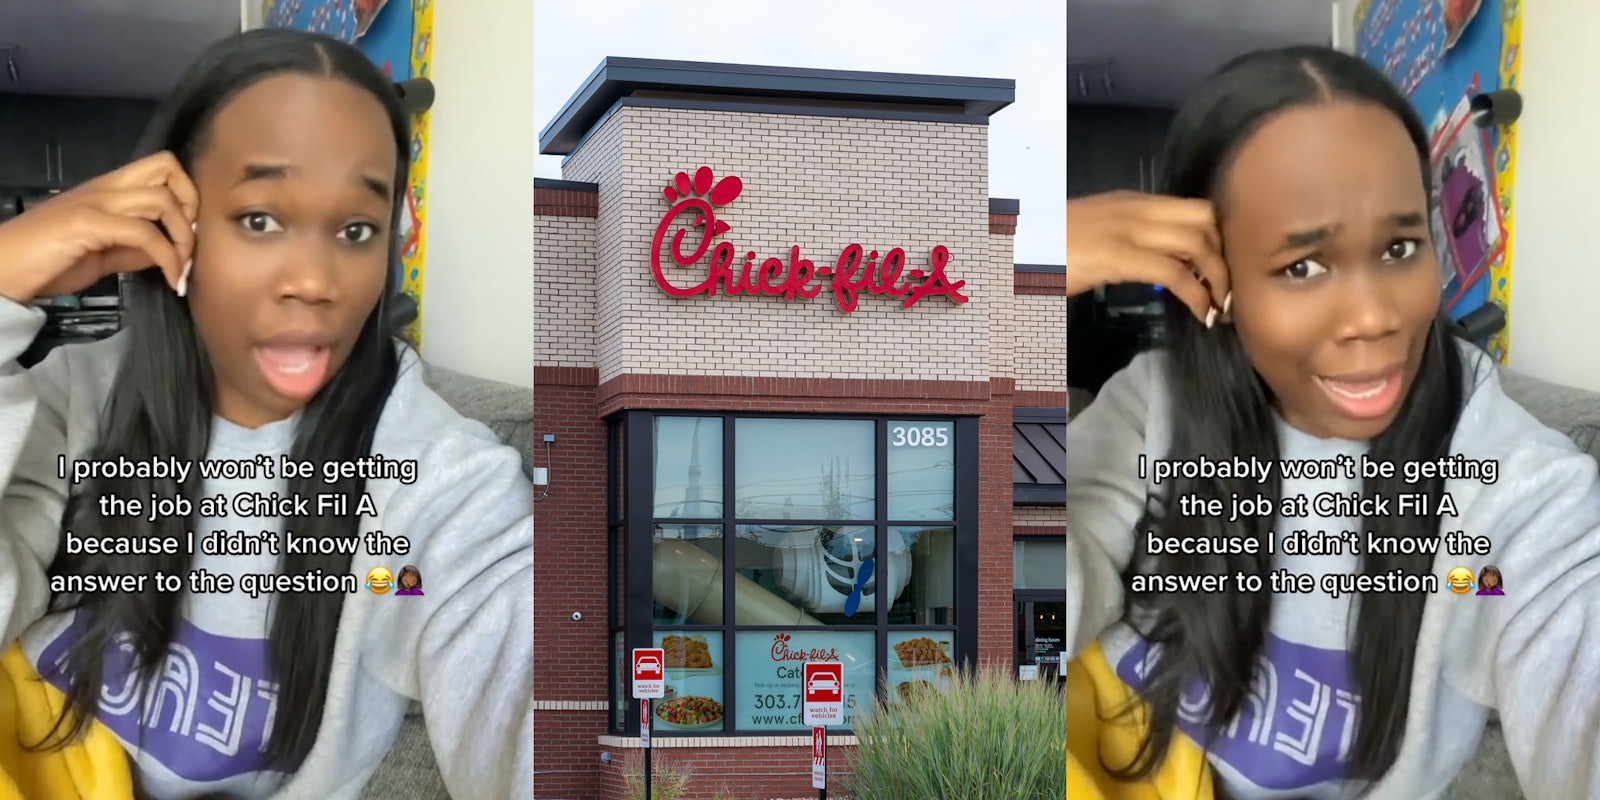 Teacher speaking with caption 'I probably won't be getting the job at Chick Fil A because I didn't know the answer to the question' (l) Chick-Fil-A building with sign (c) Teacher speaking with caption 'I probably won't be getting the job at Chick Fil A because I didn't know the answer to the question' (r)